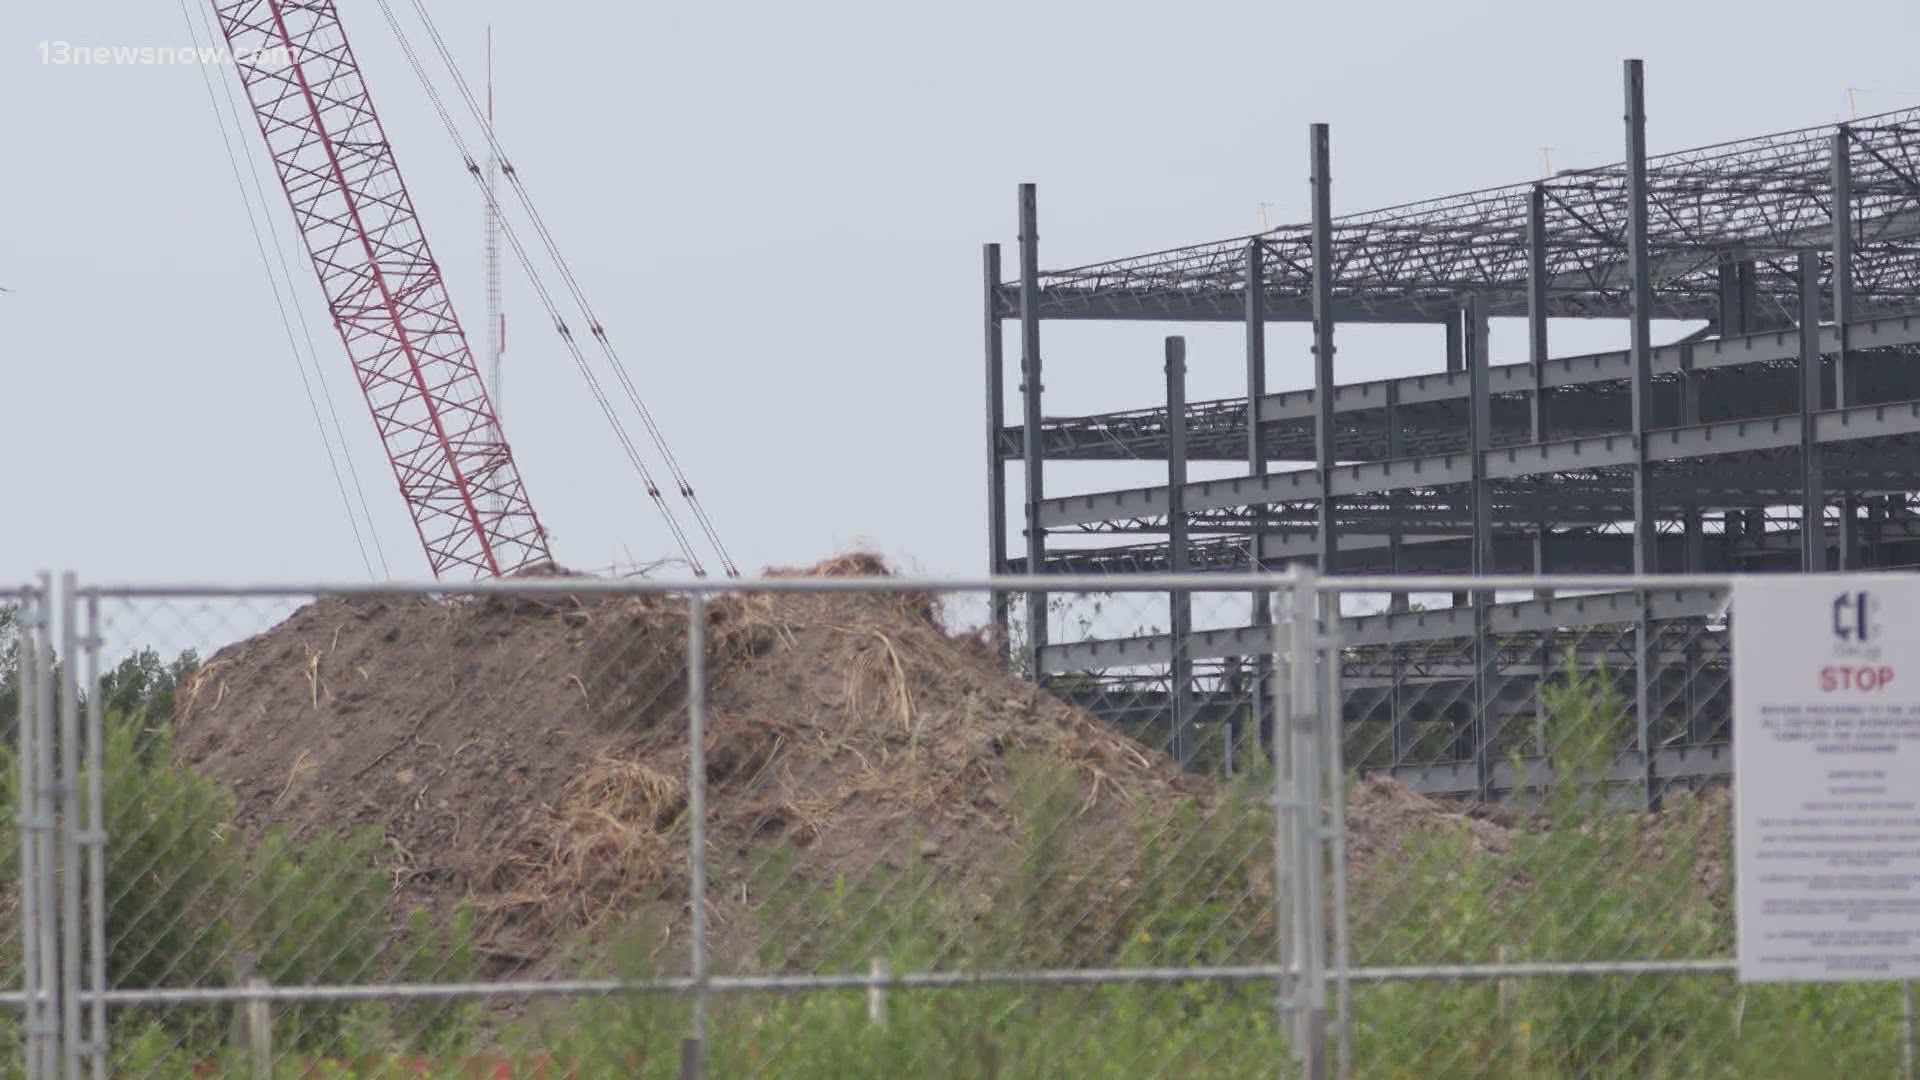 Two workers died Saturday in a "construction-related accident" in Suffolk at the site of a new Amazon robotics center. The Conlan Company is building the center.